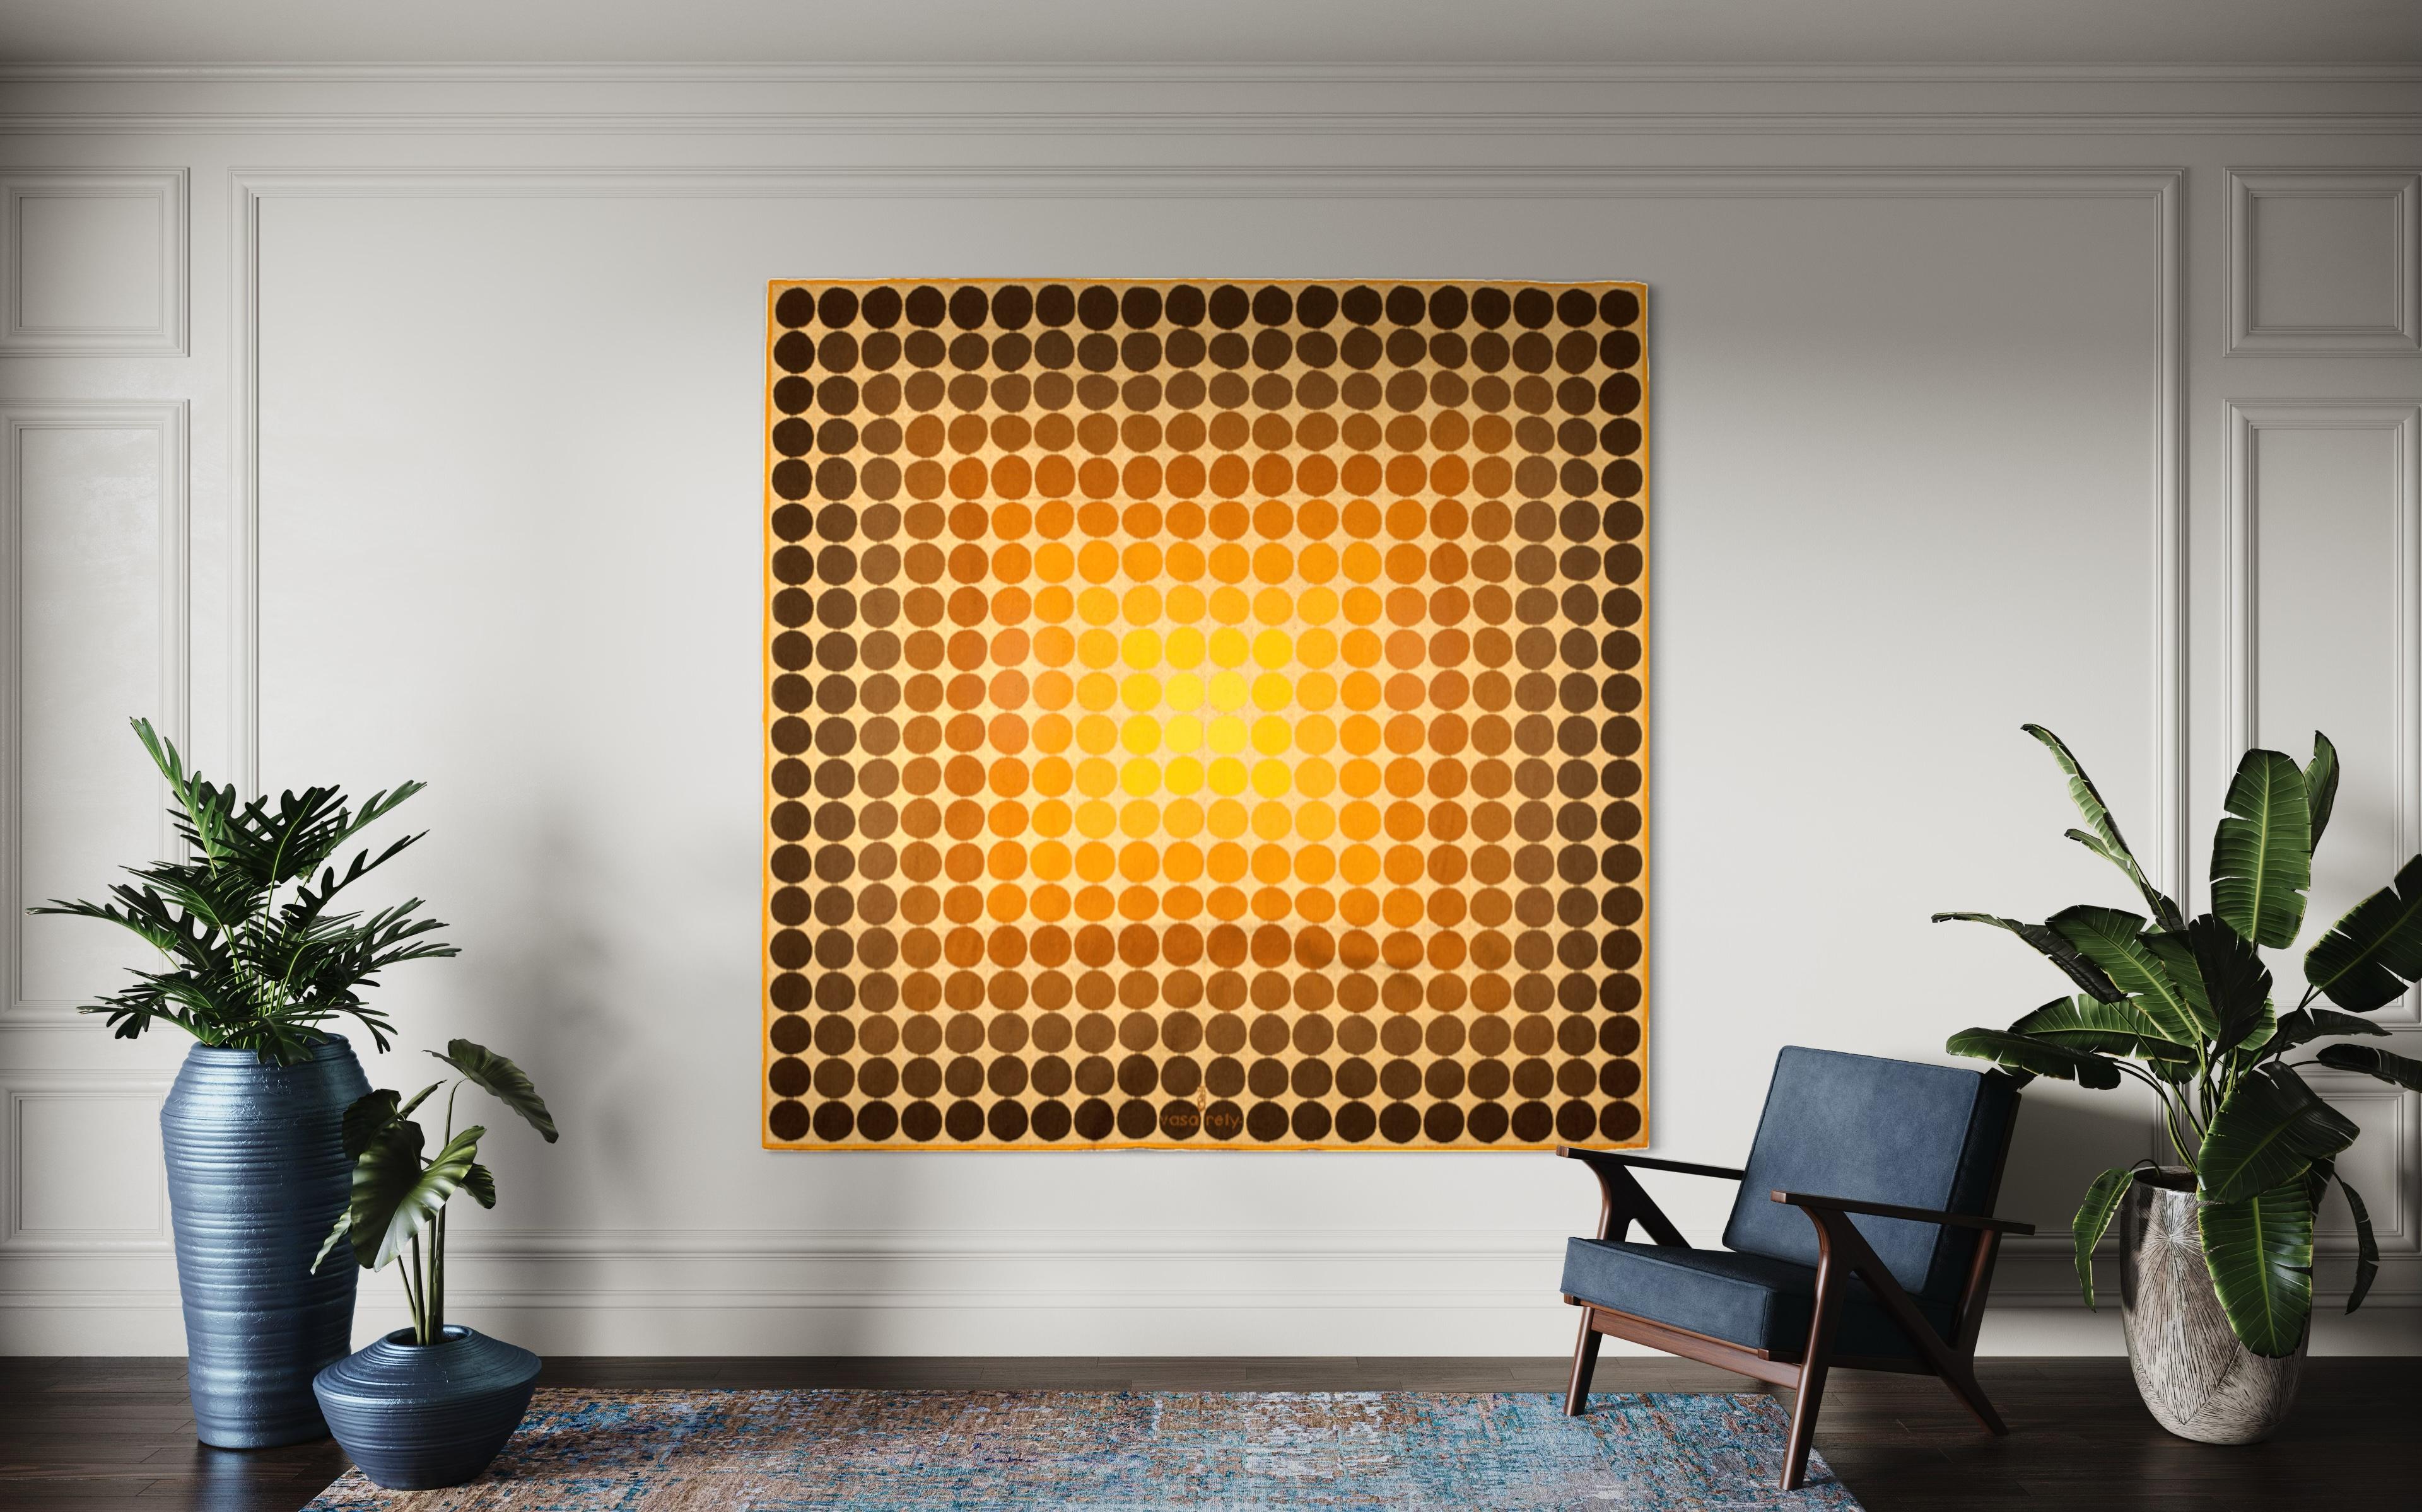 
Introducing a stunning Op-Art tapestry titled C.T.A 102, meticulously designed by the visionary artist Victor Vasarely (1908-1987) and expertly crafted at the esteemed Atelier Tabard Freres workshop in Aubusson, France, circa 1966. This remarkable